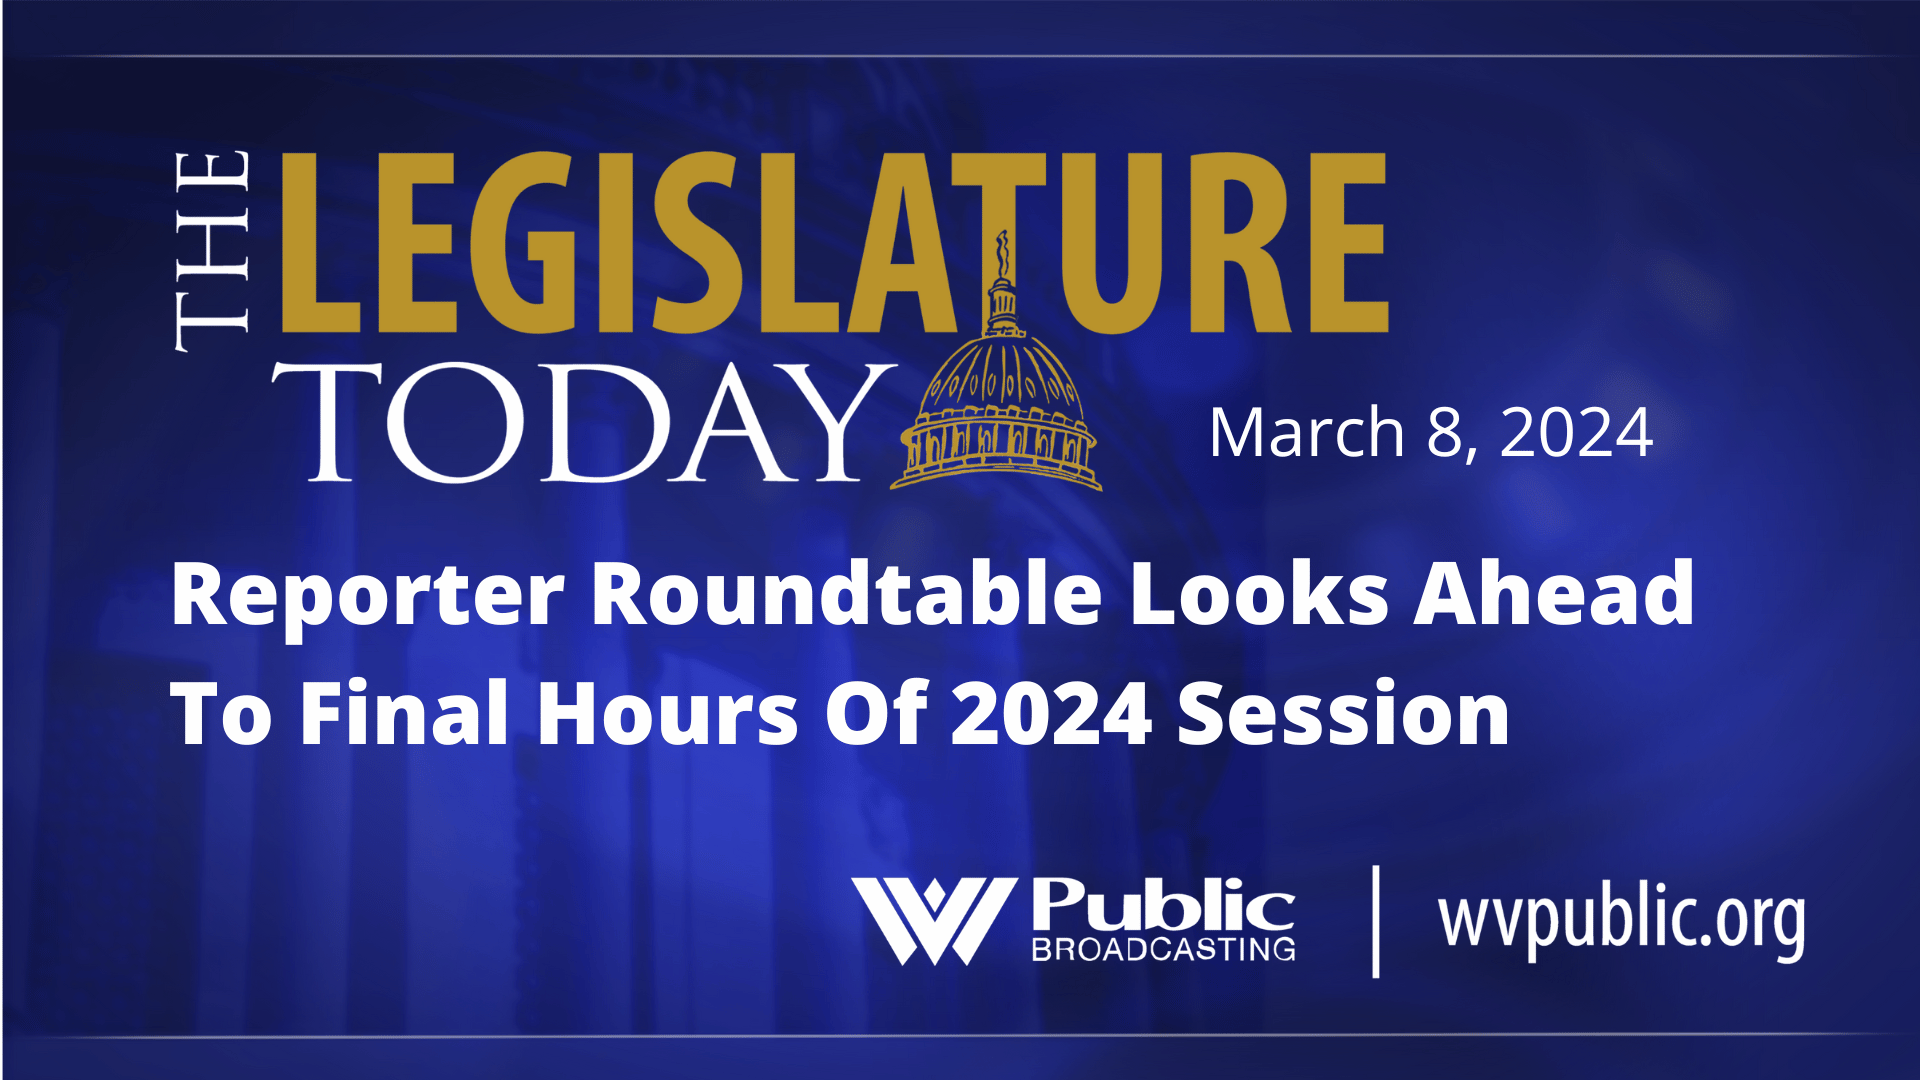 Reporter Roundtable Looks Ahead To Final Hours Of 2024 Session